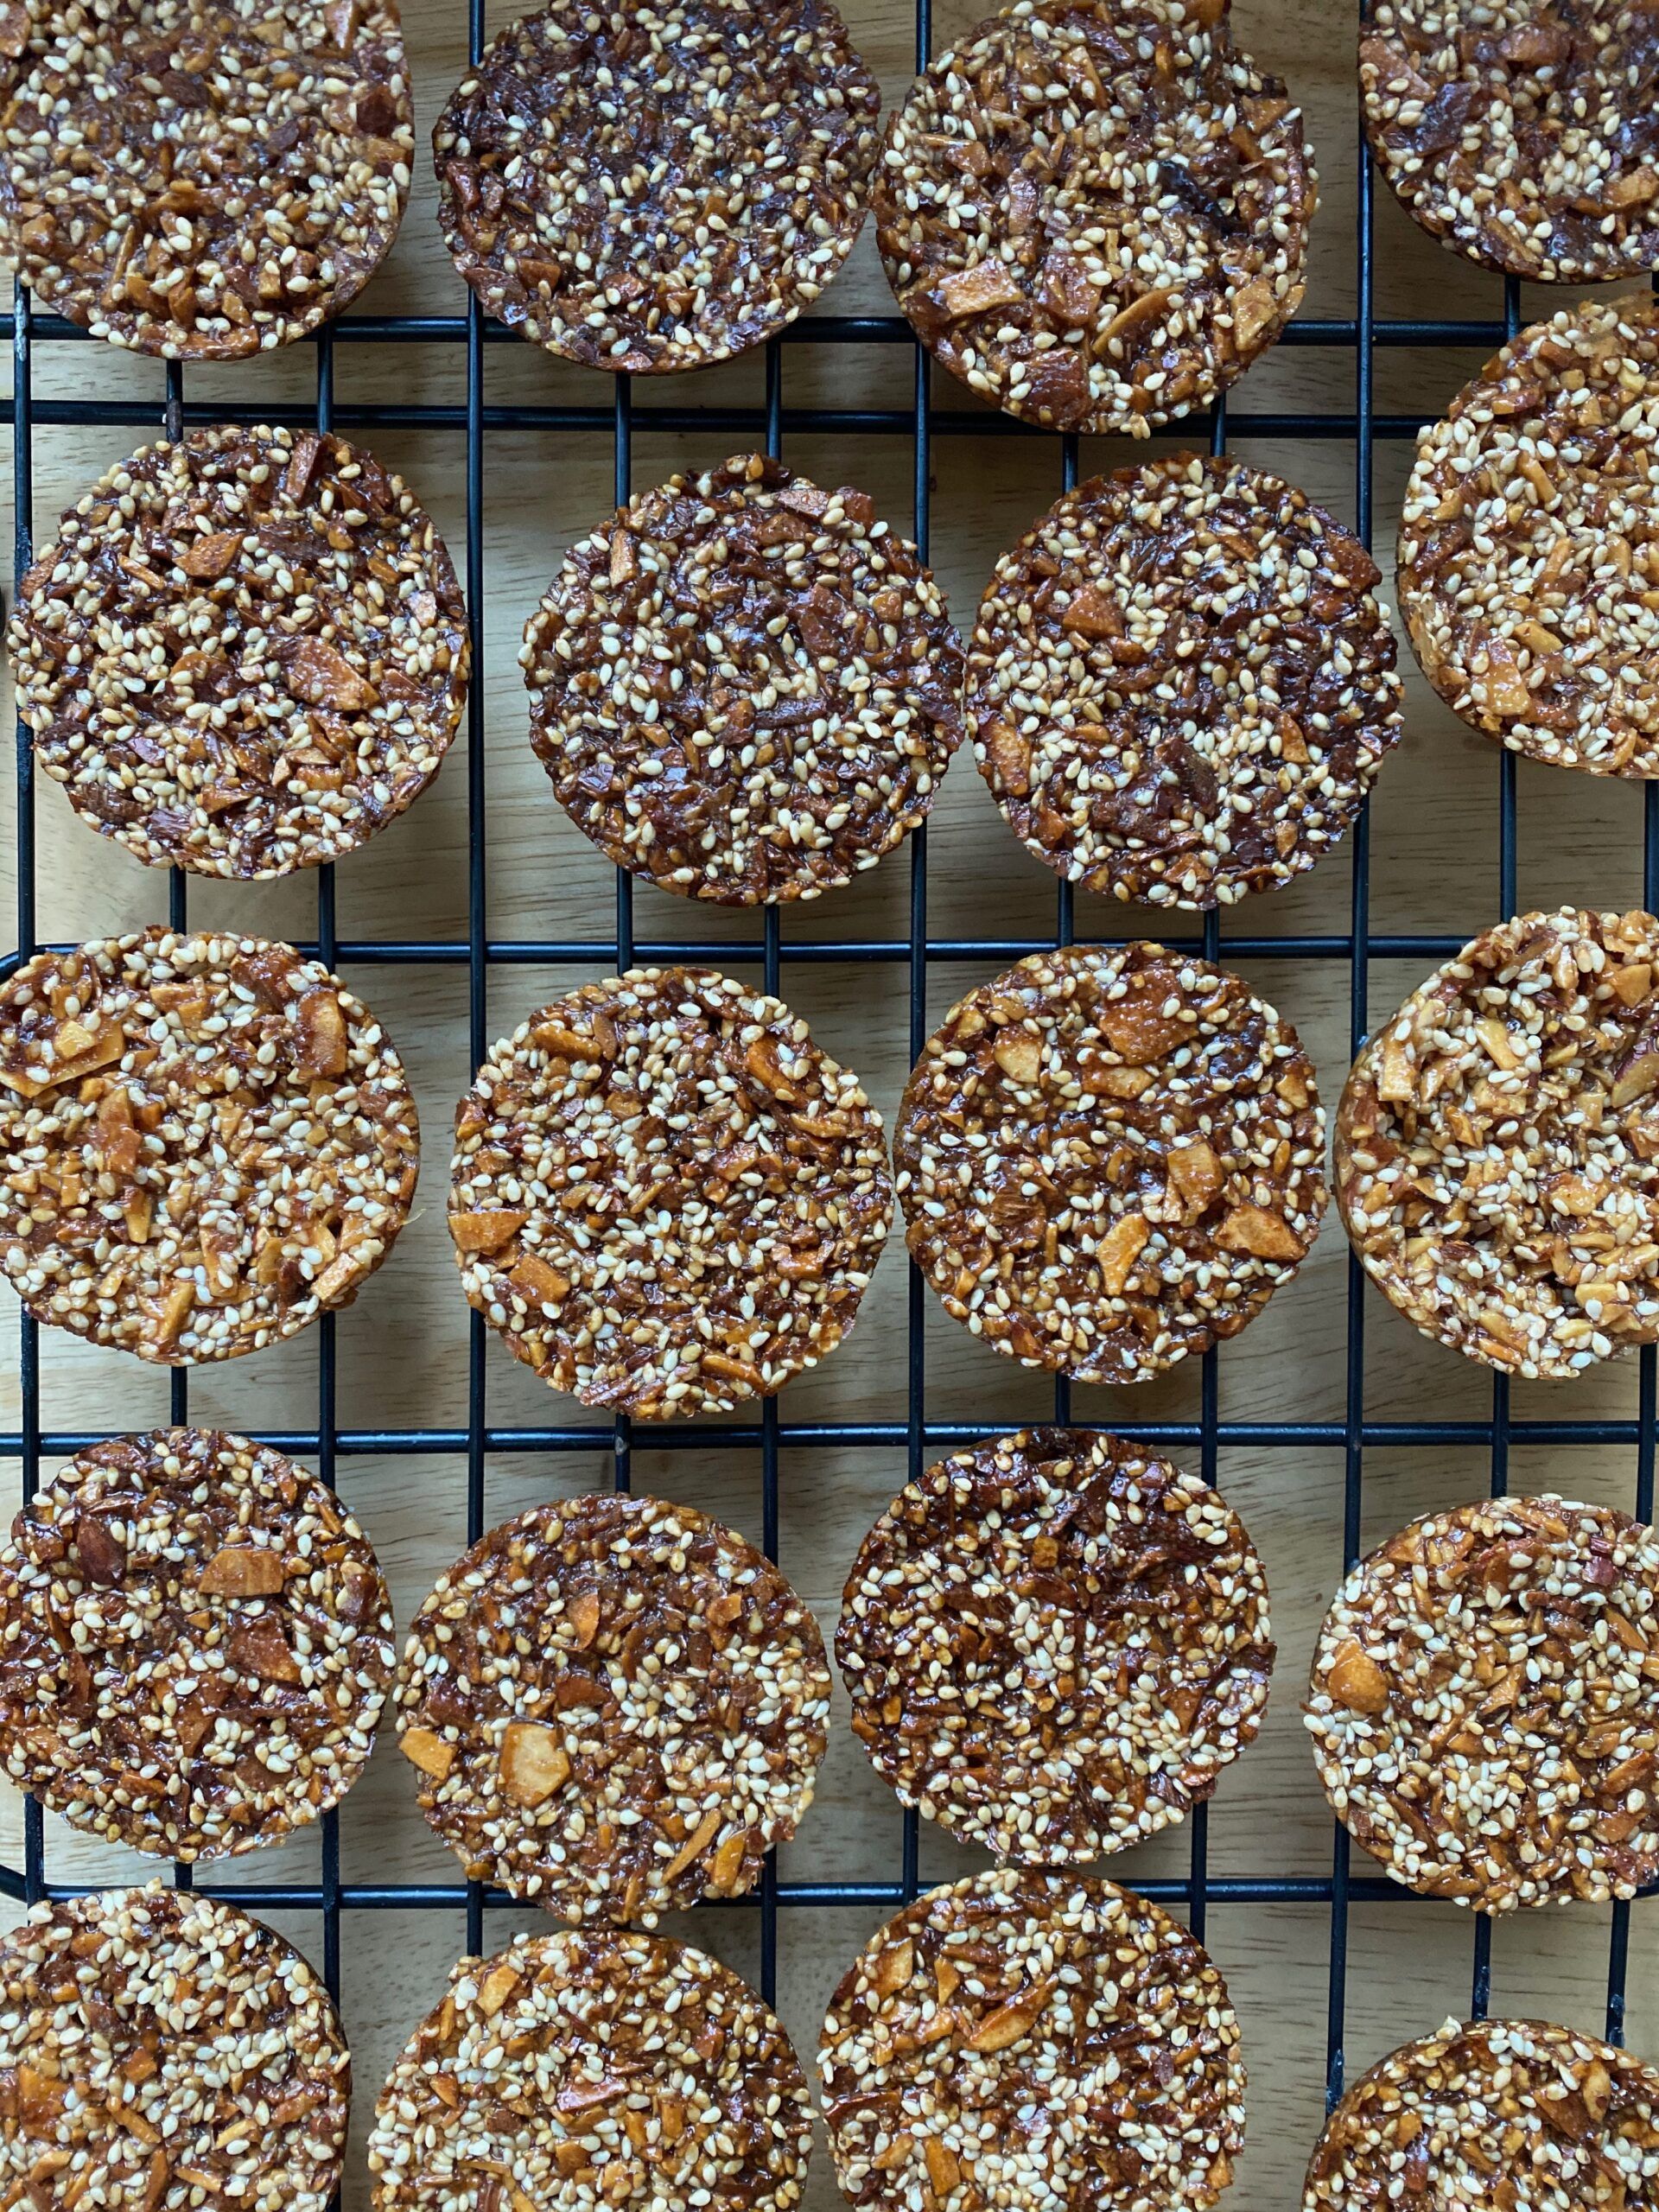 A cooling rack full of round cookies, studded with sesame seeds and chopped almonds. Photo taken by me.